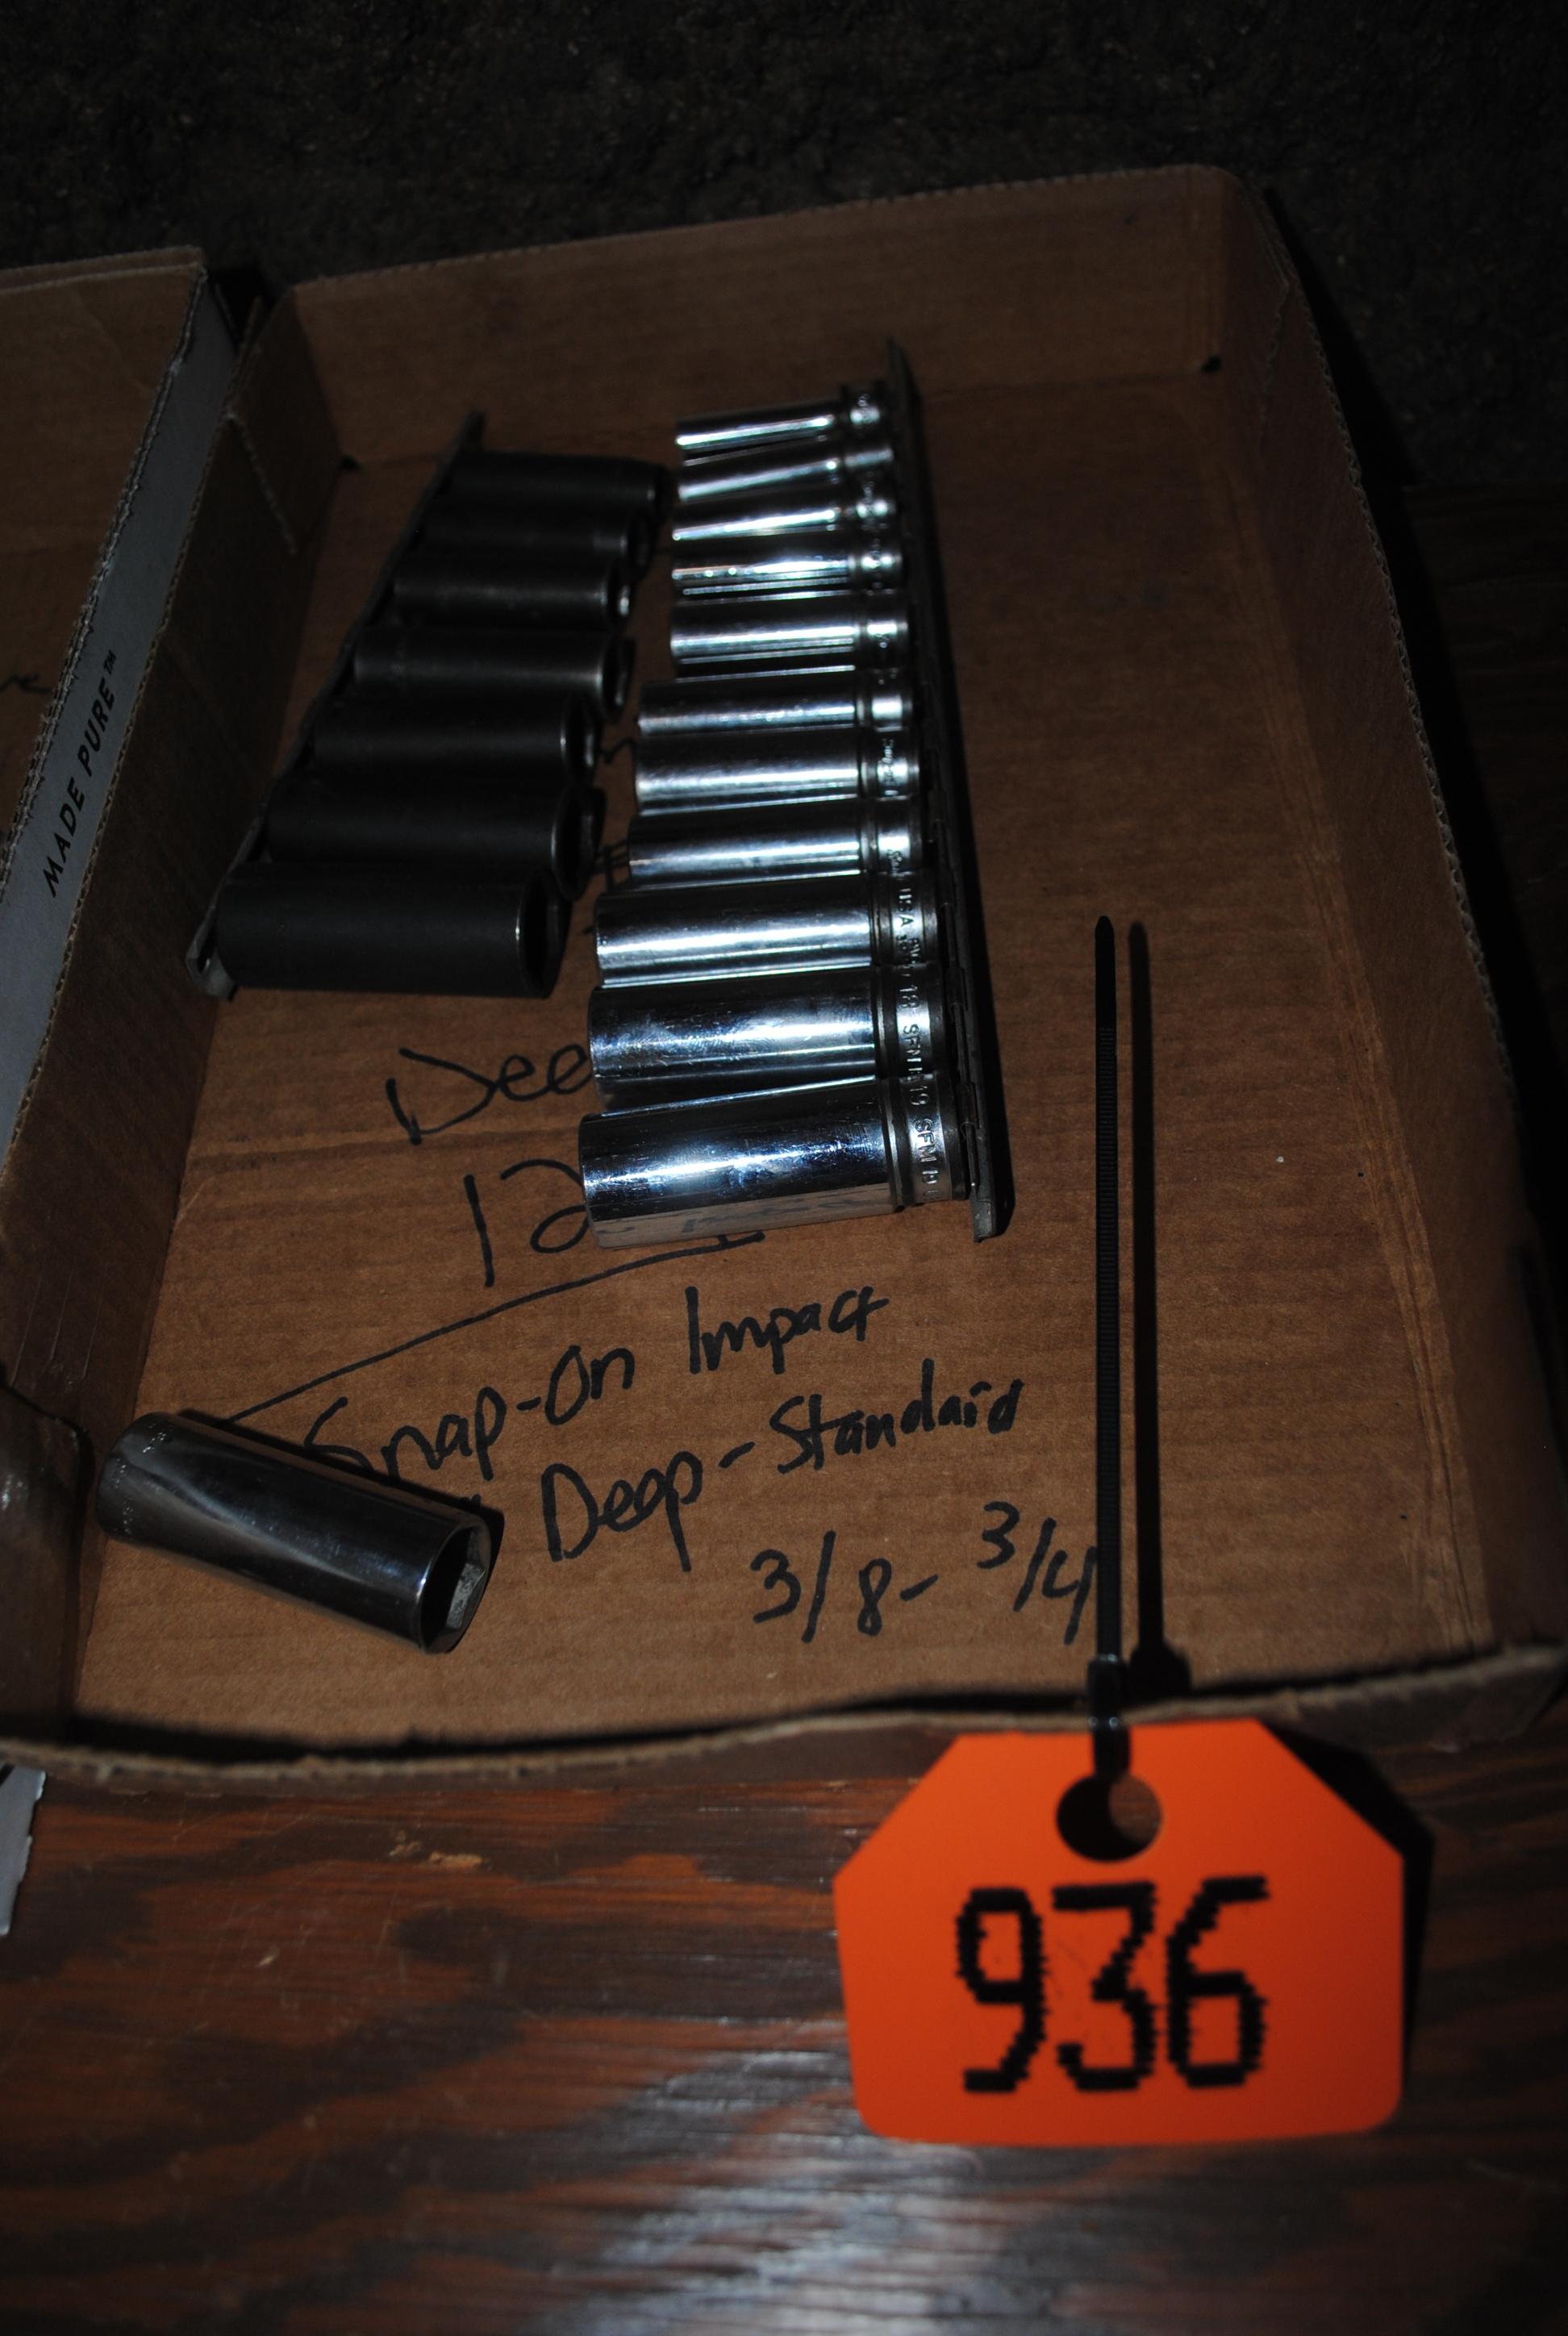 Snap-On 3/8 drive metric 9-19 deep well 12-point, Snap-On impact 3/8 deep standard 3/8-3/4